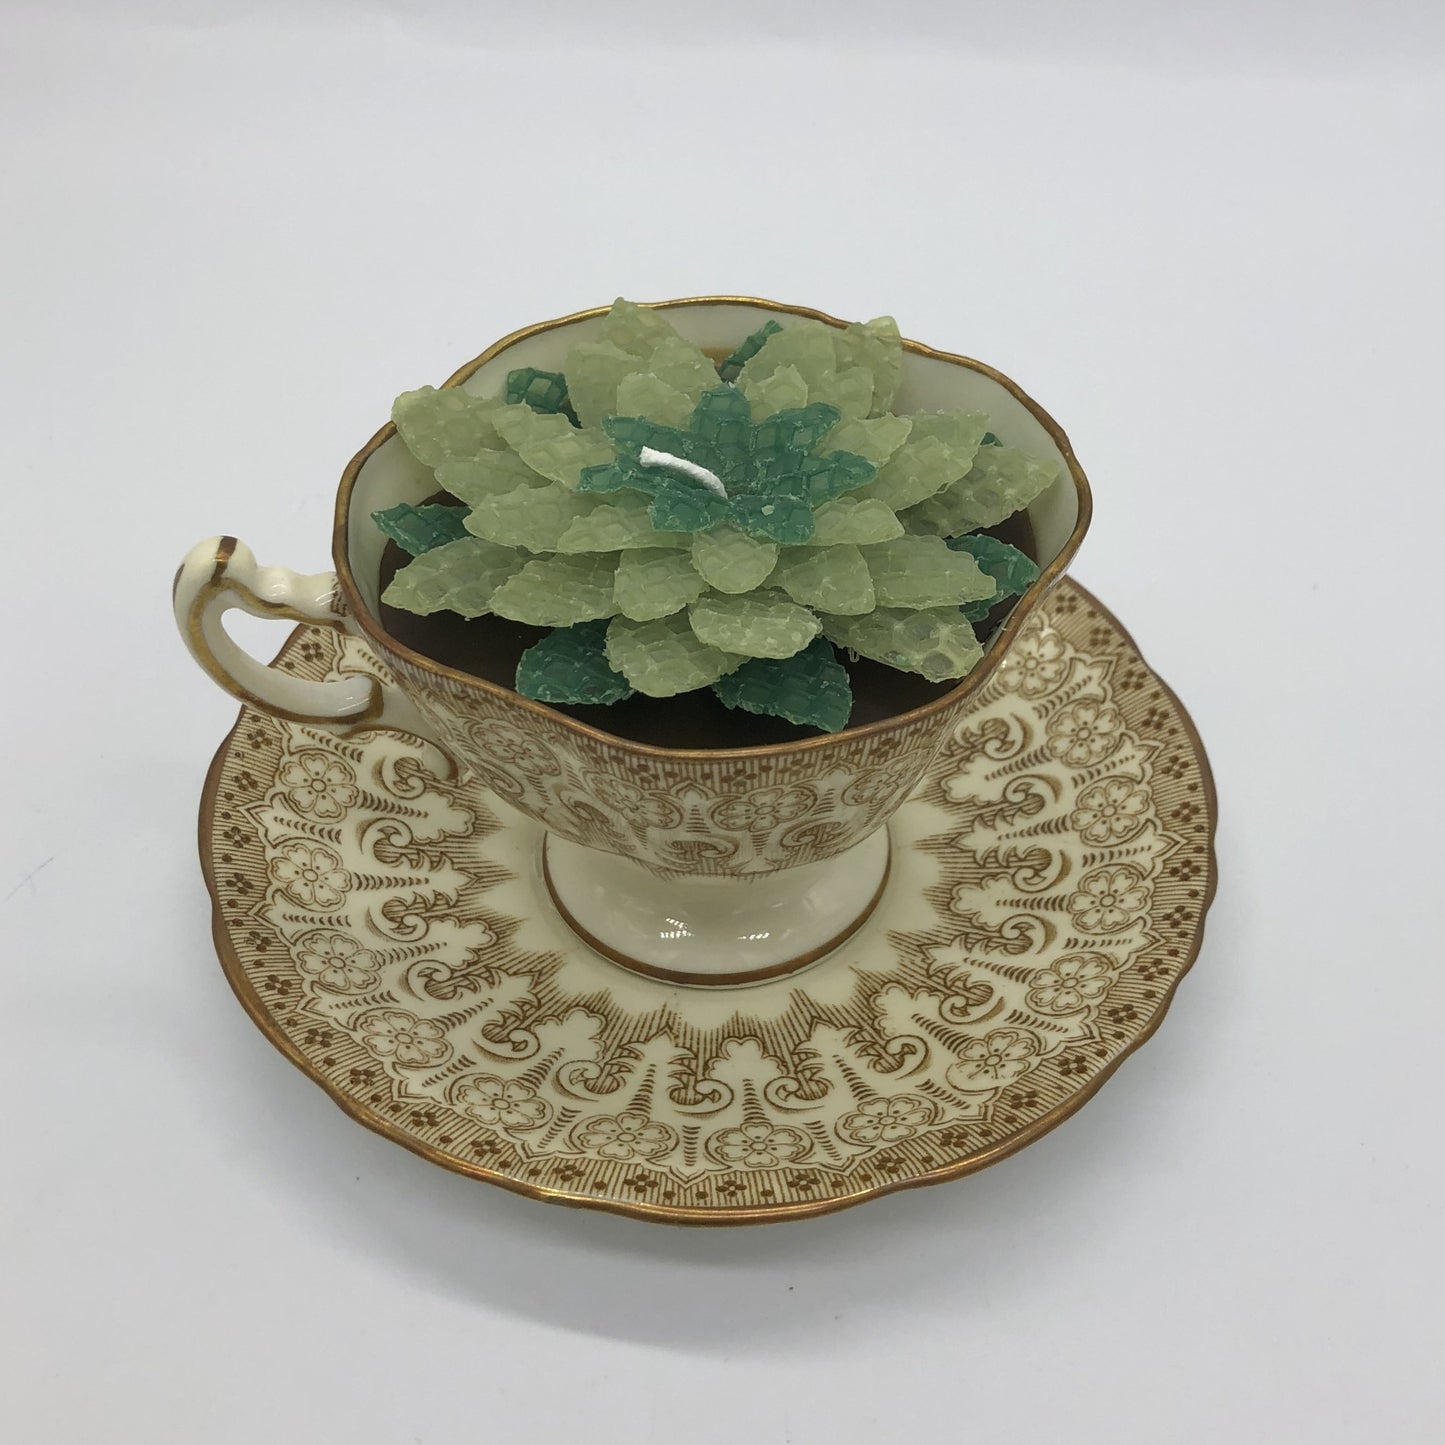 Fancy teacup with gold decorations filled with brown candle and decorated with succulent in shades of green.